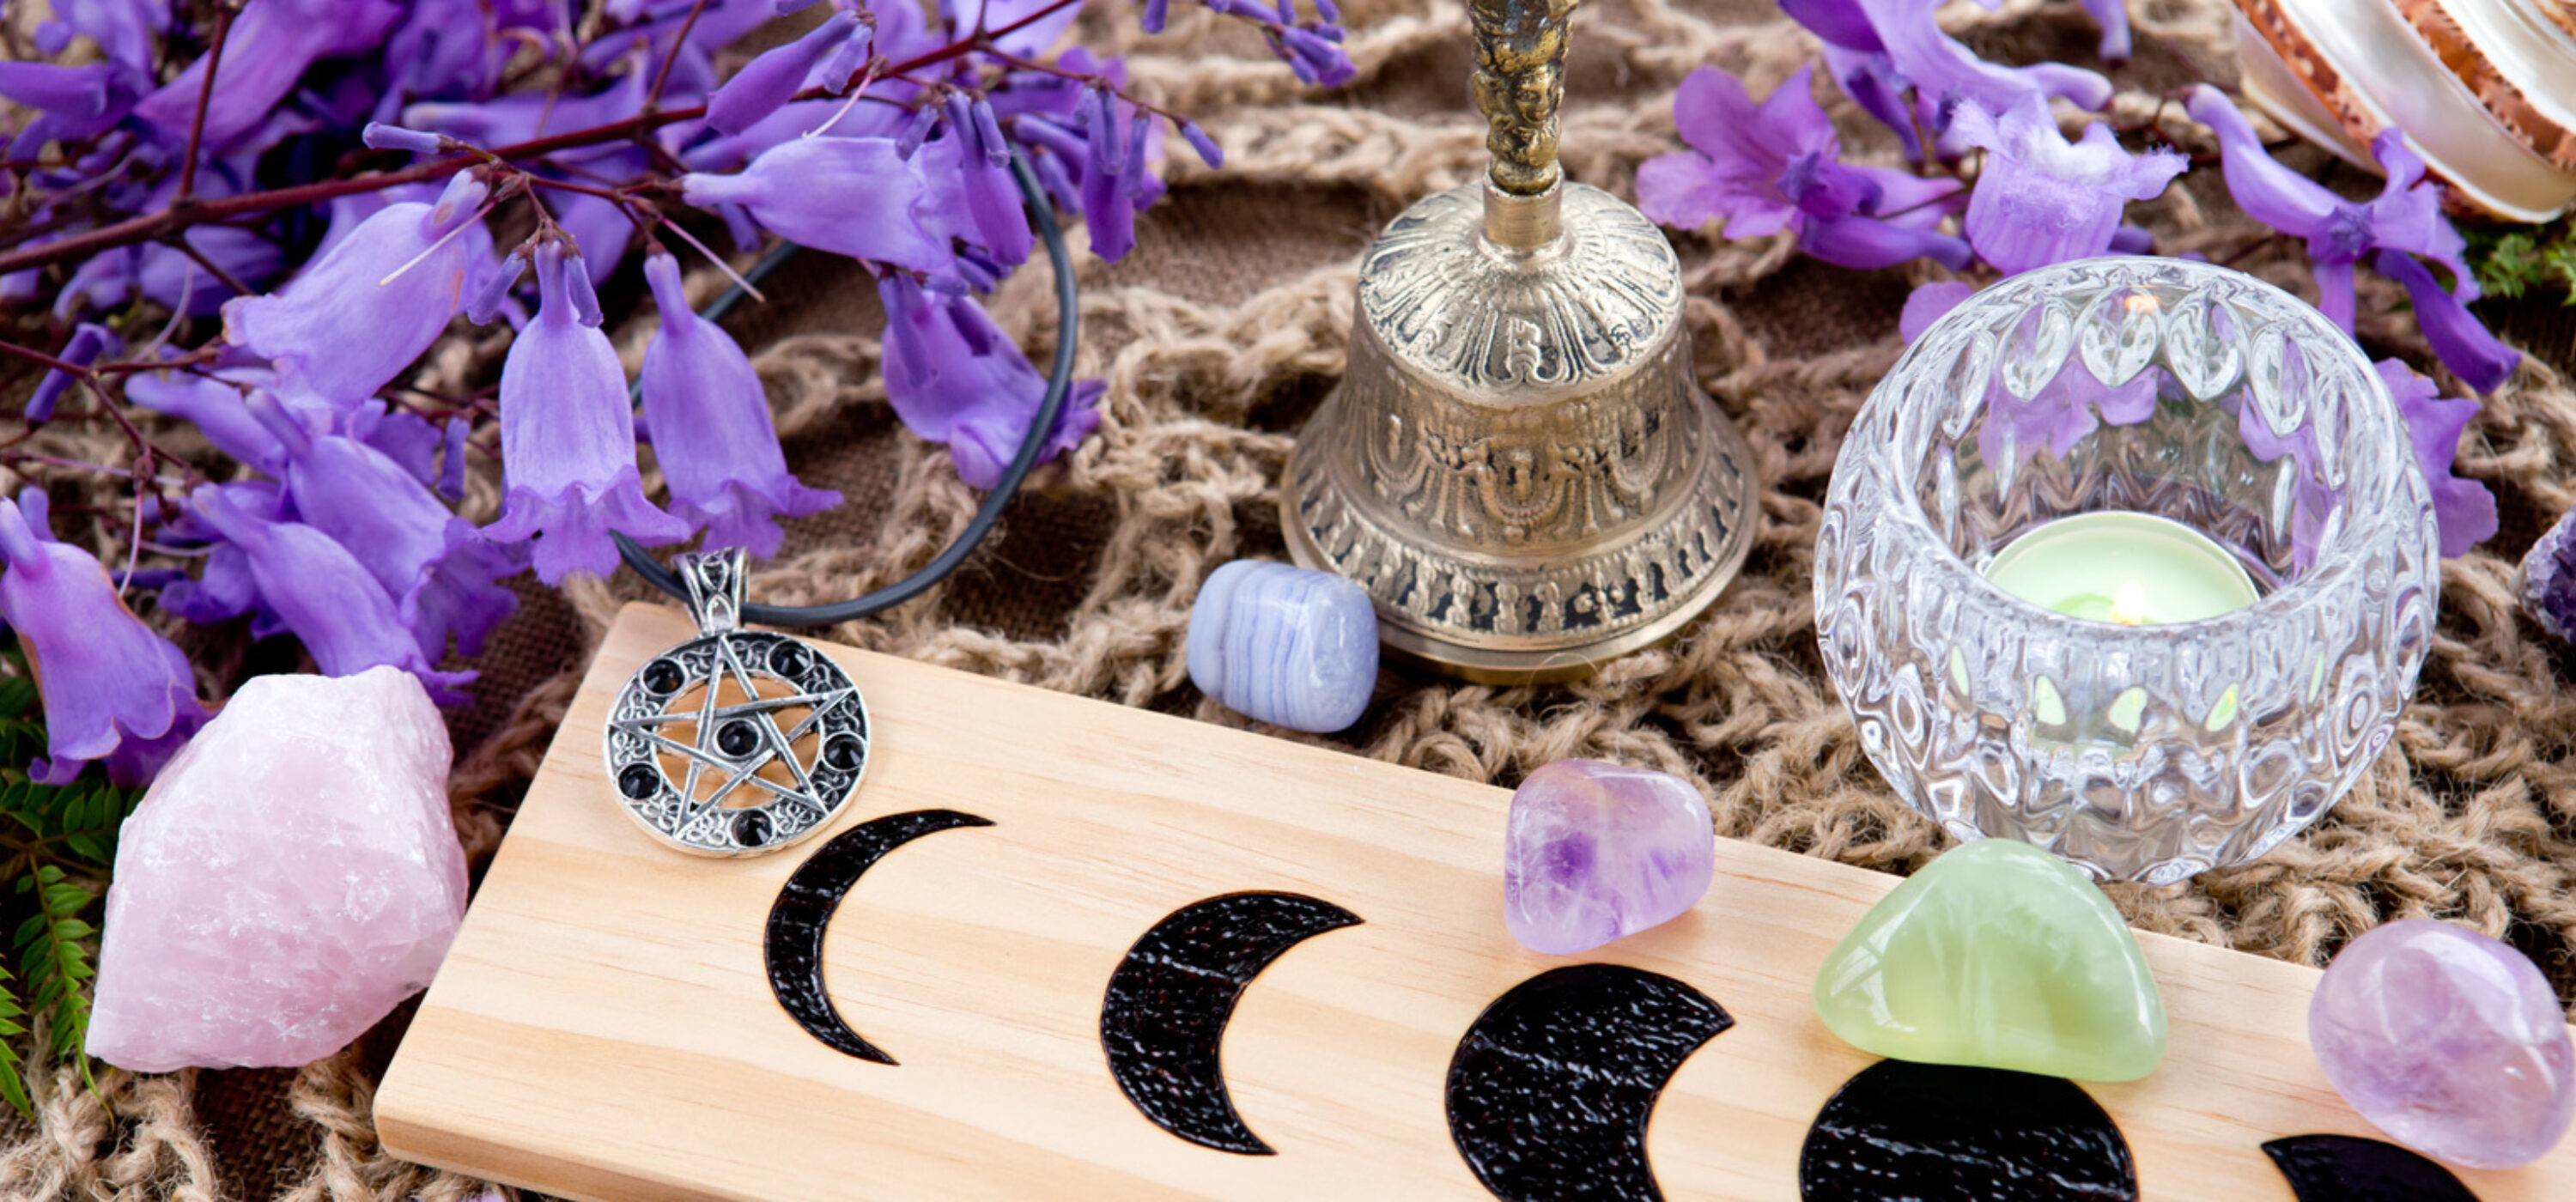 Wicca: A Beginner's Guide For Spell Tools and Altars